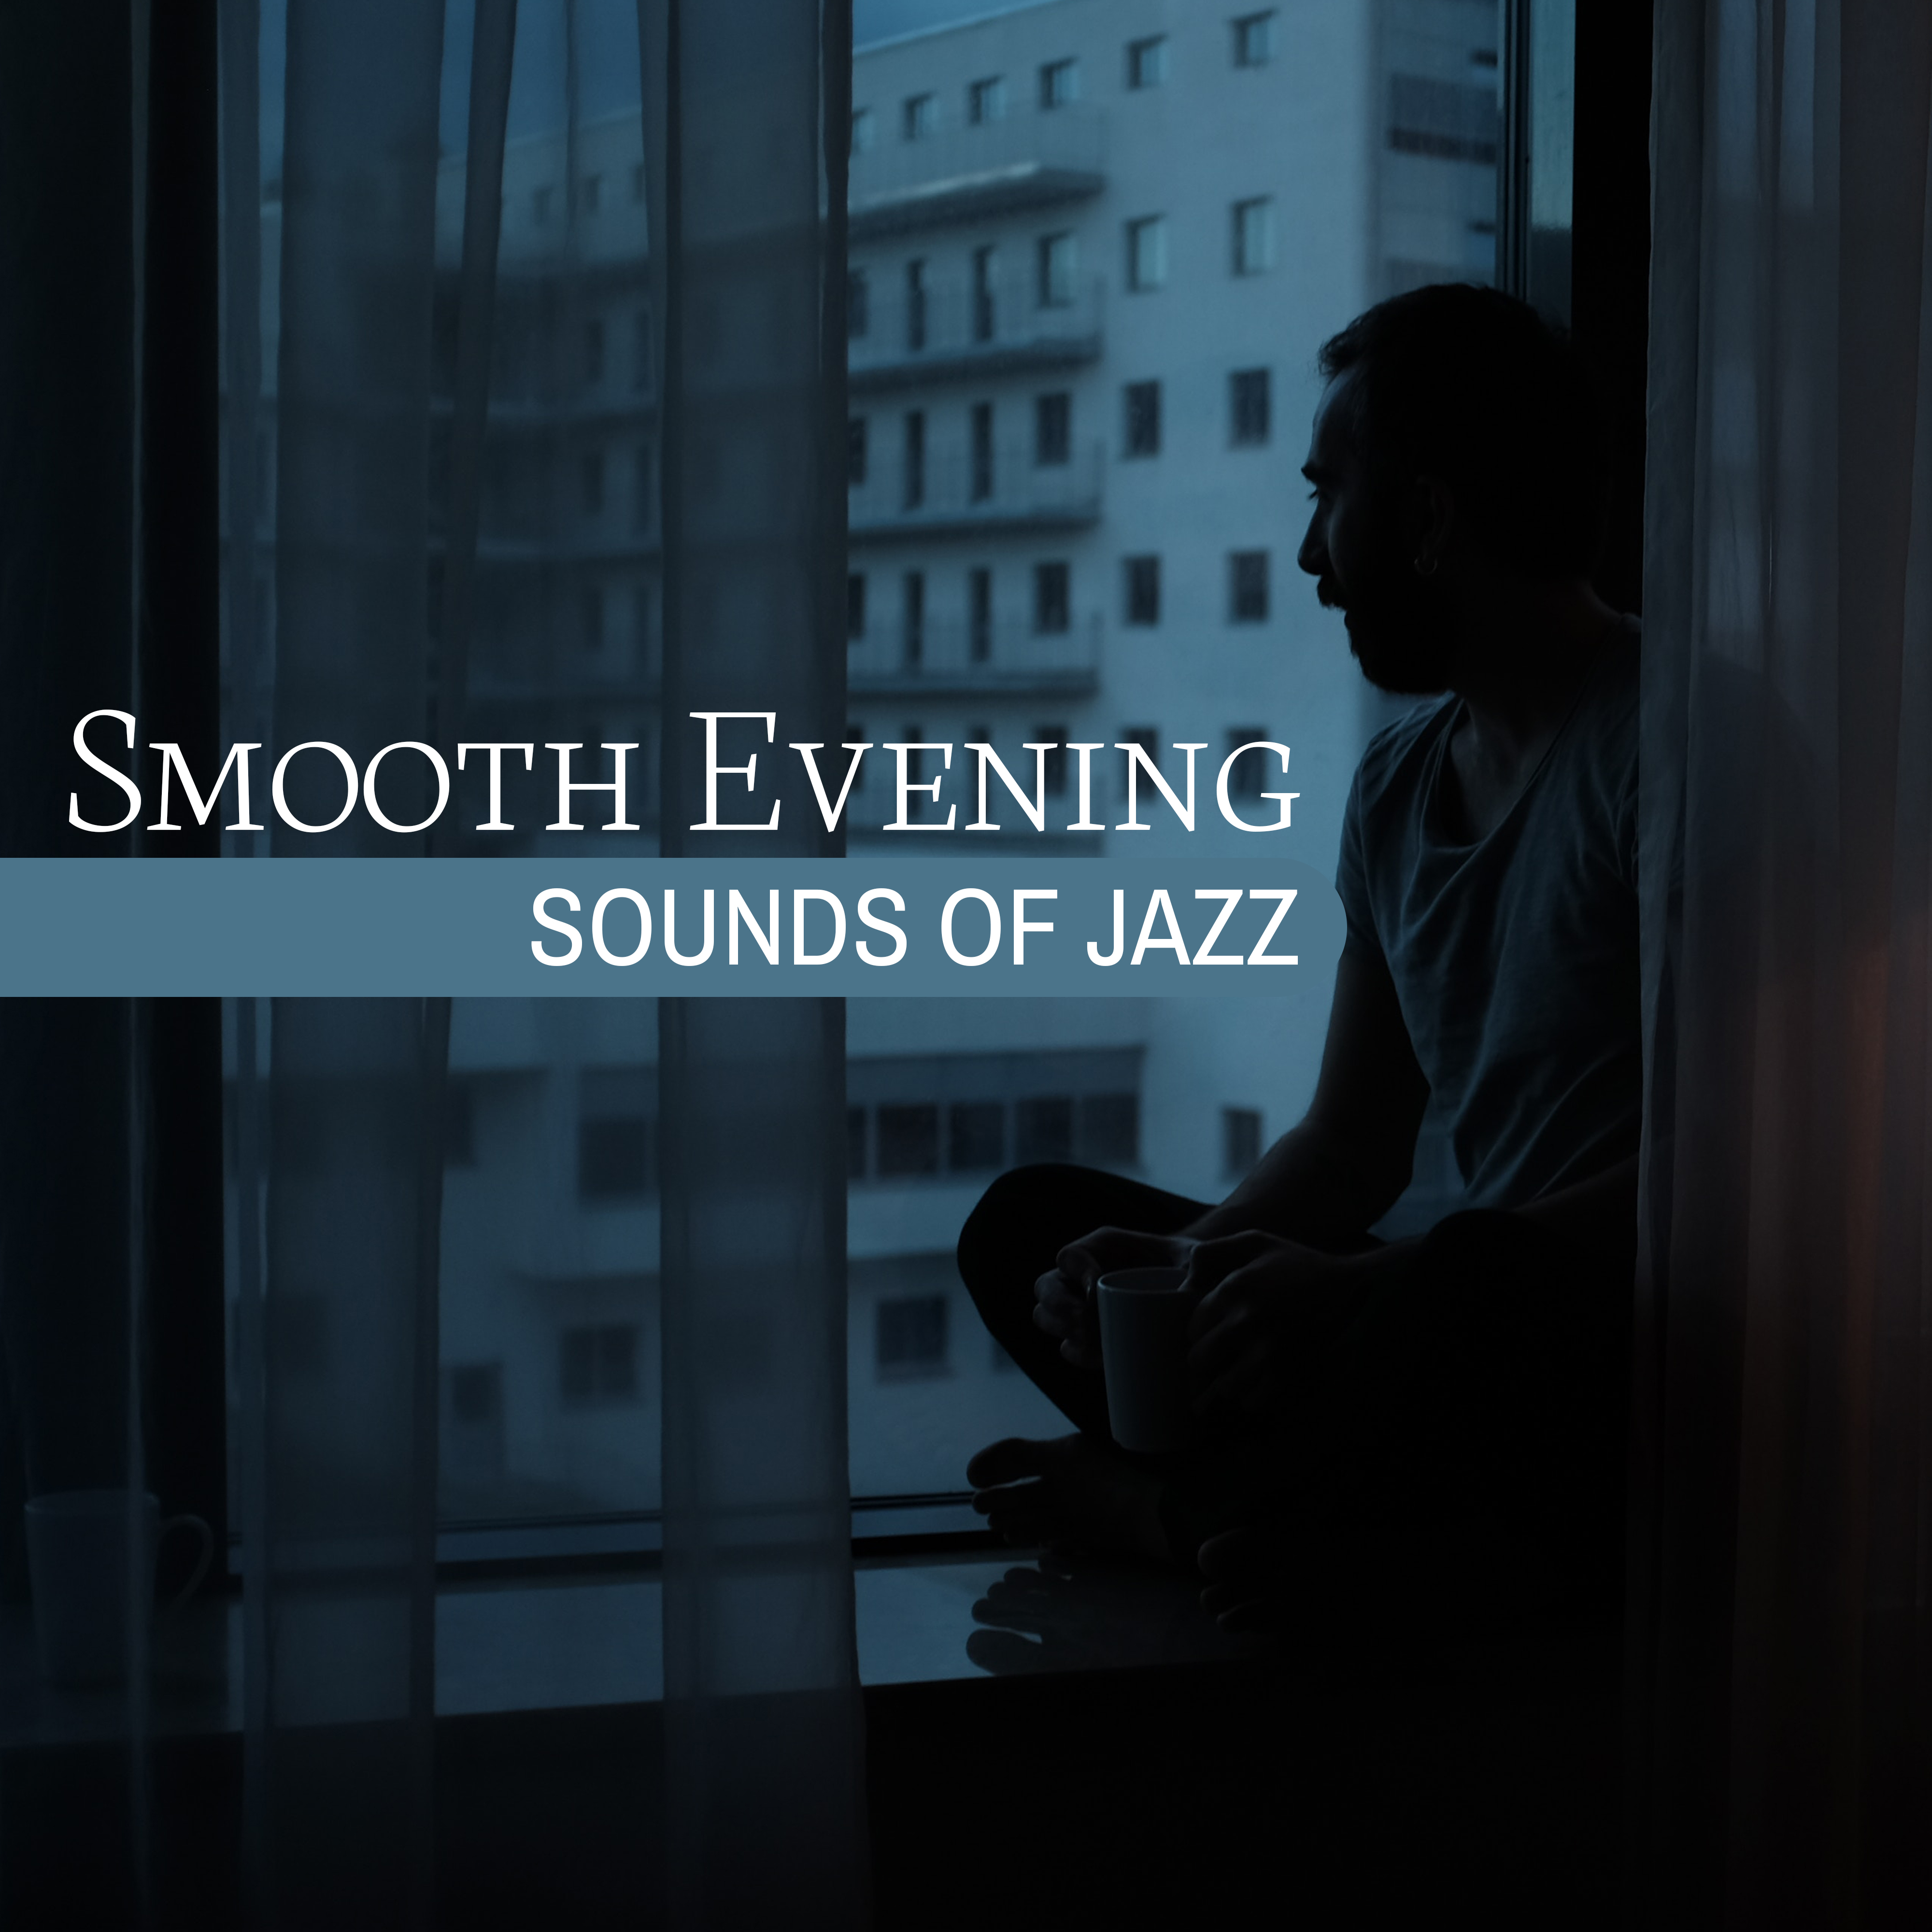 Smooth Evening Sounds of Jazz